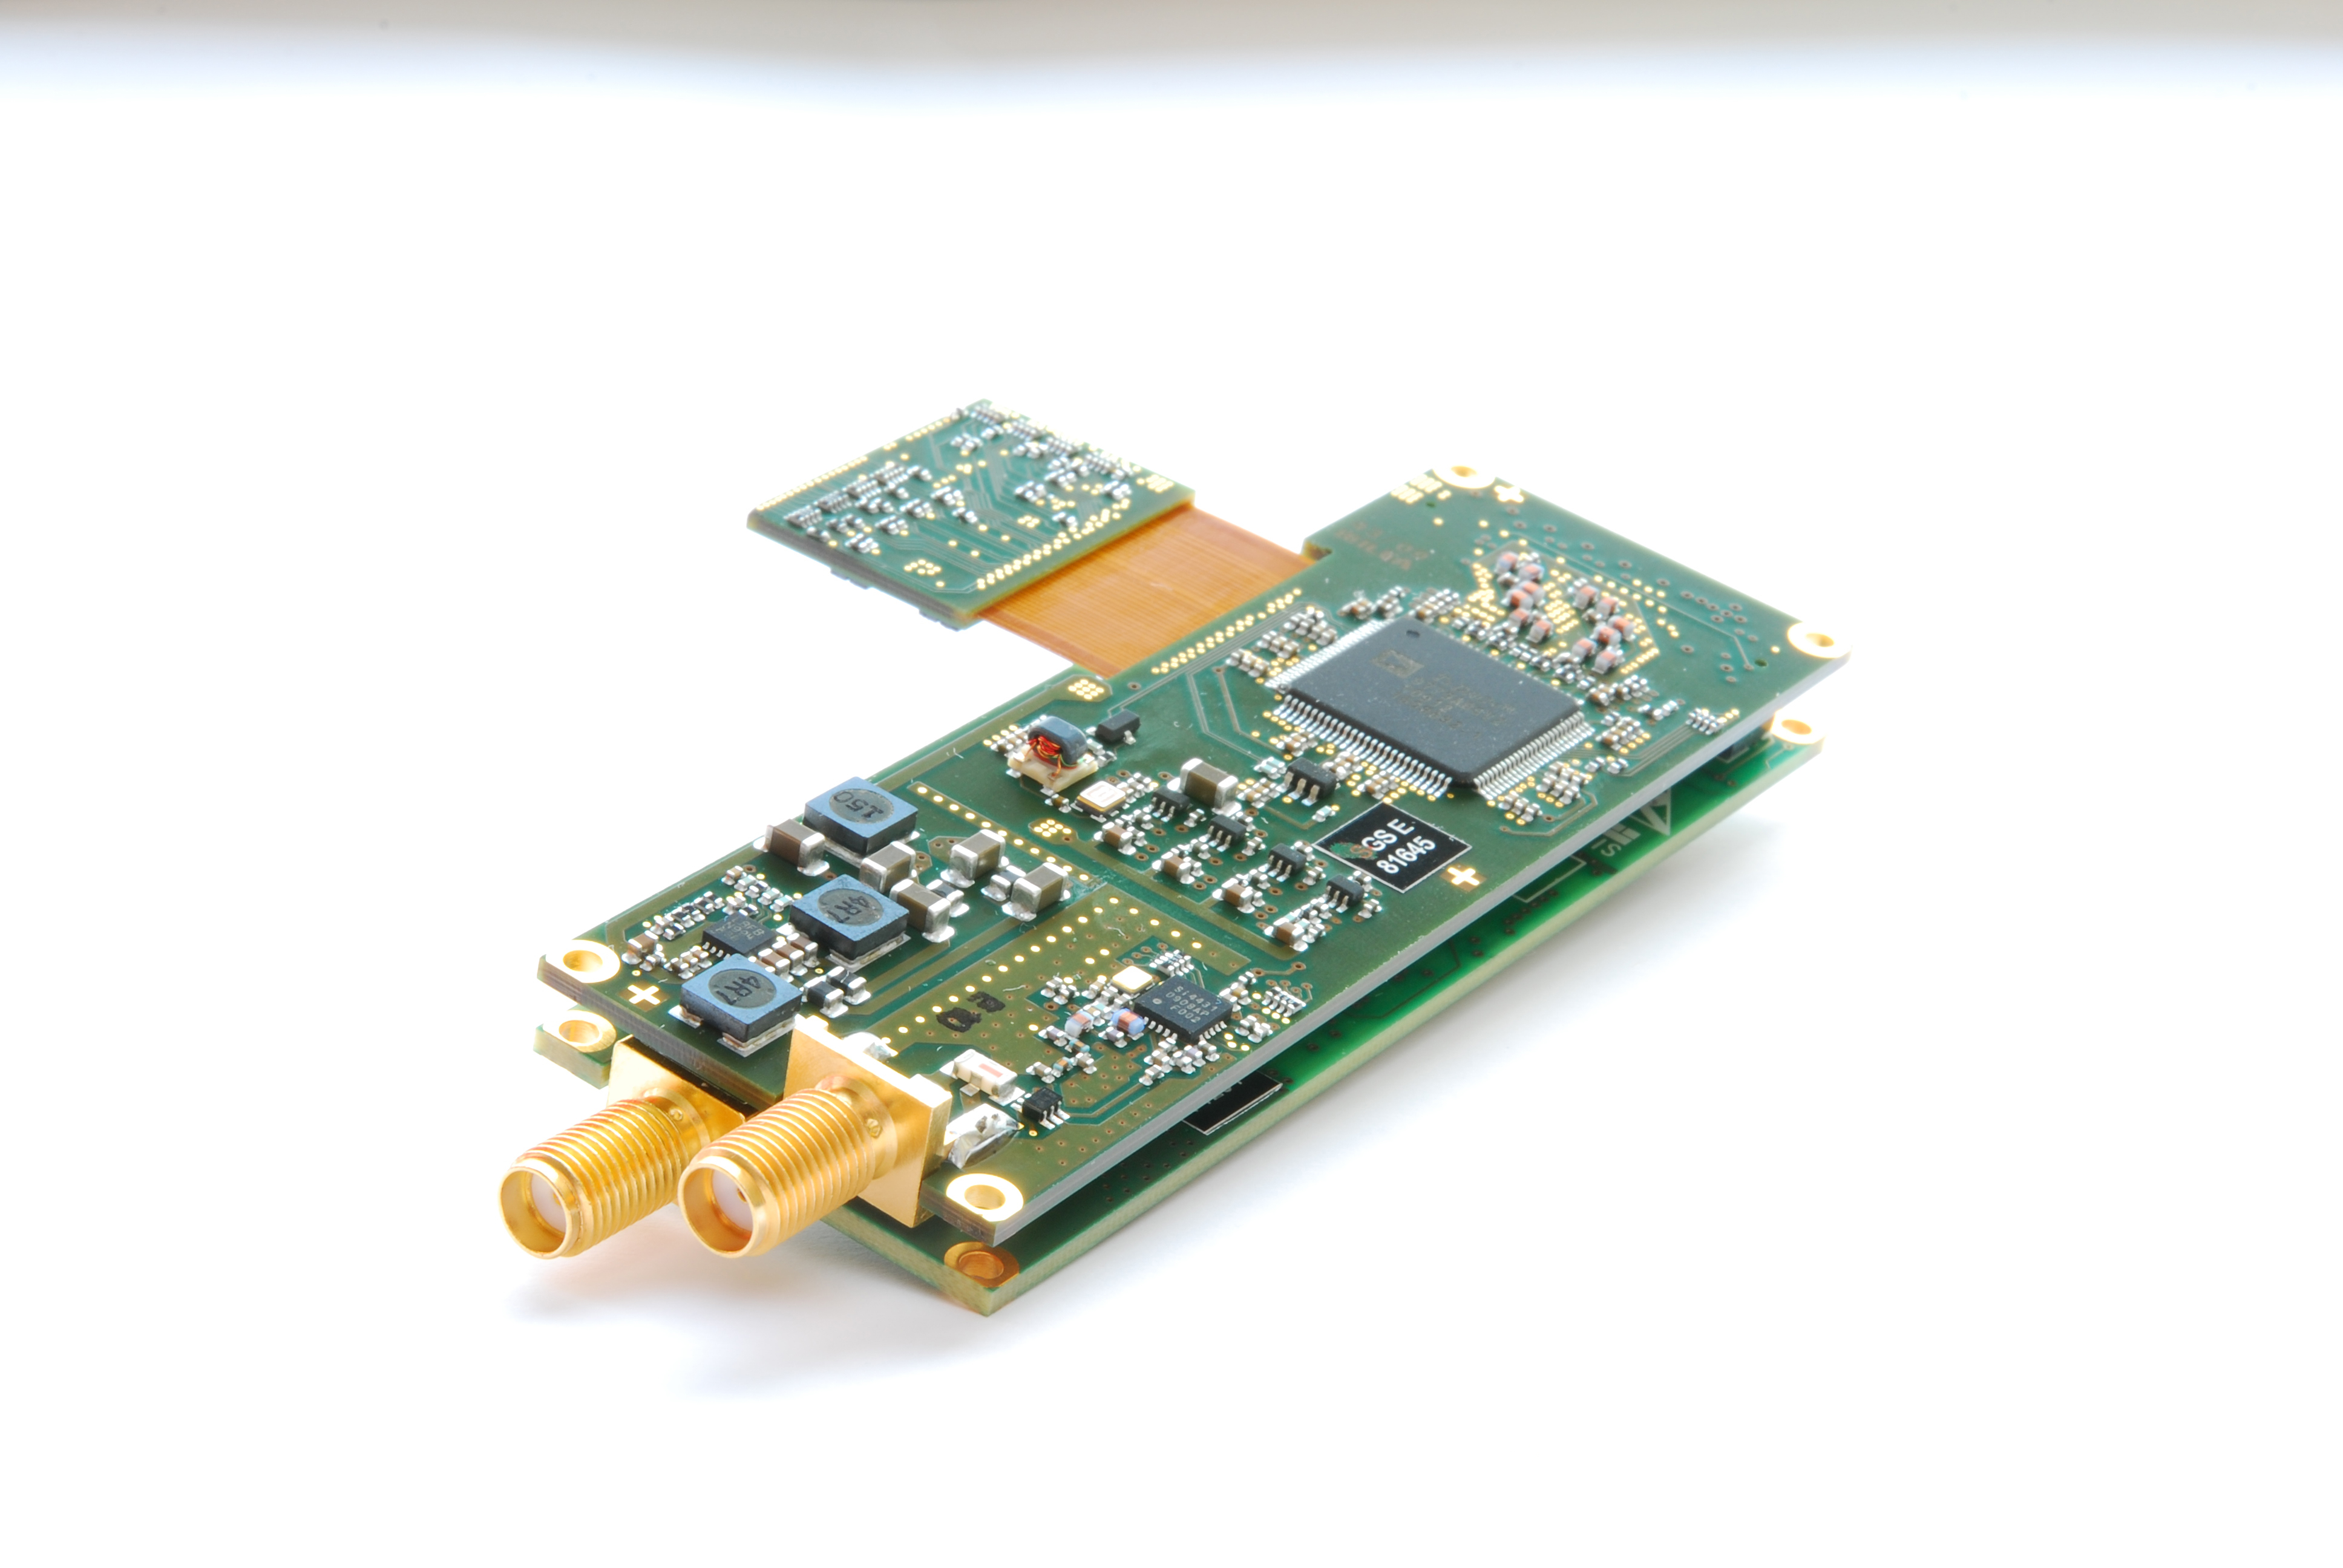 Circuit boards for linearization and for broadband communication